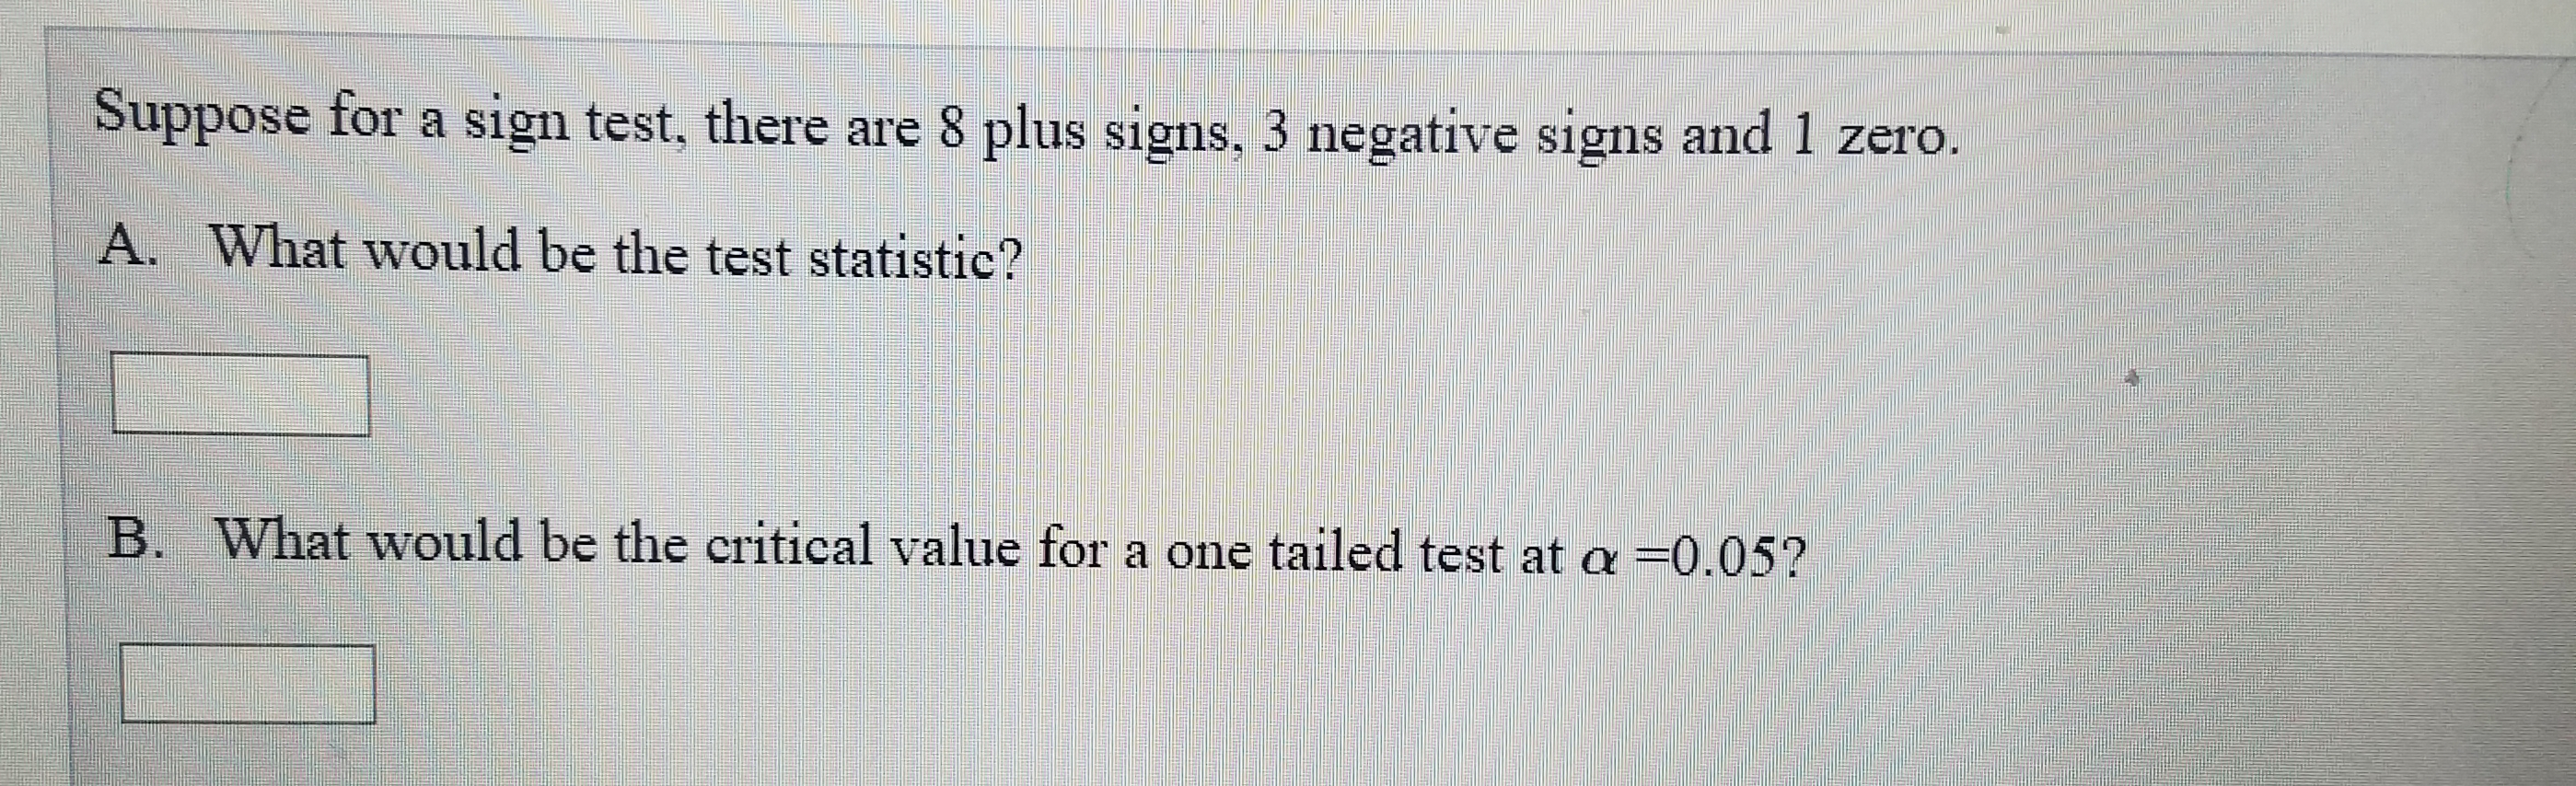 Suppose for a sign test, there are 8 plus signs, 3 negative signs and 1 zero.
A. What would be the test statistic?
B. What would be the critical value for a one tailed test at a =0.05?
